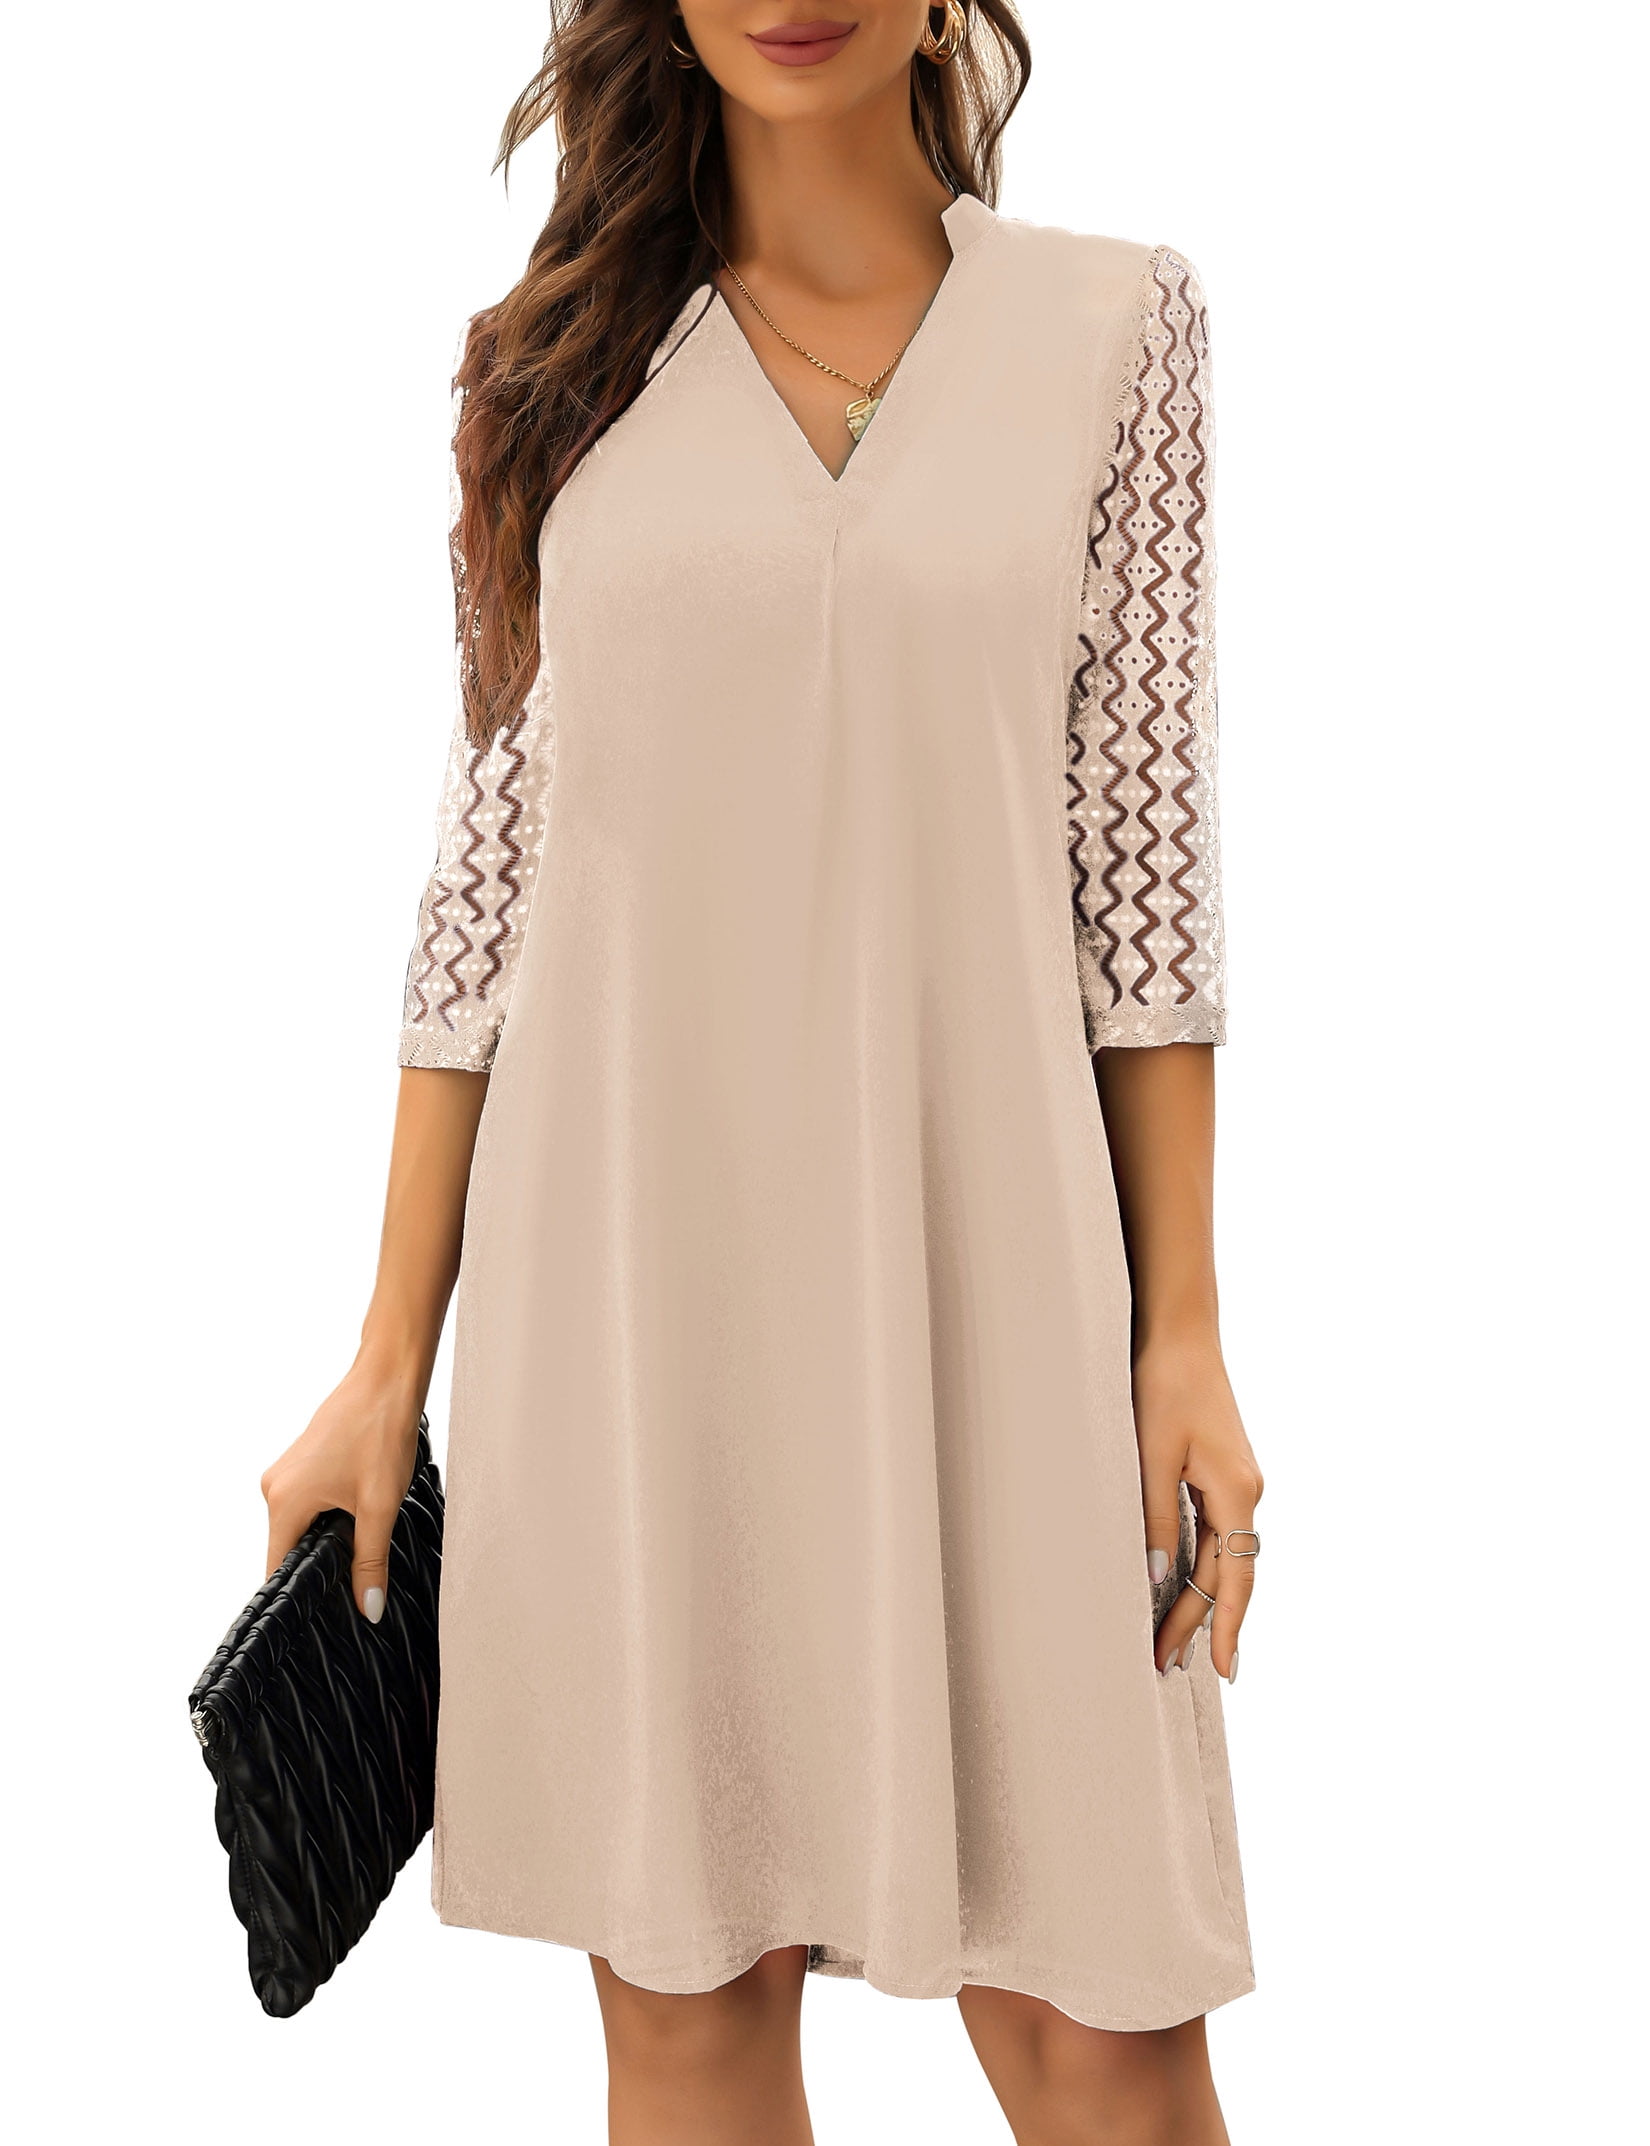 Oyang Women's Tunic Dress Lace 3/4 Sleeve Shift Dress V Neck Casual Work  Office Loose Dresses